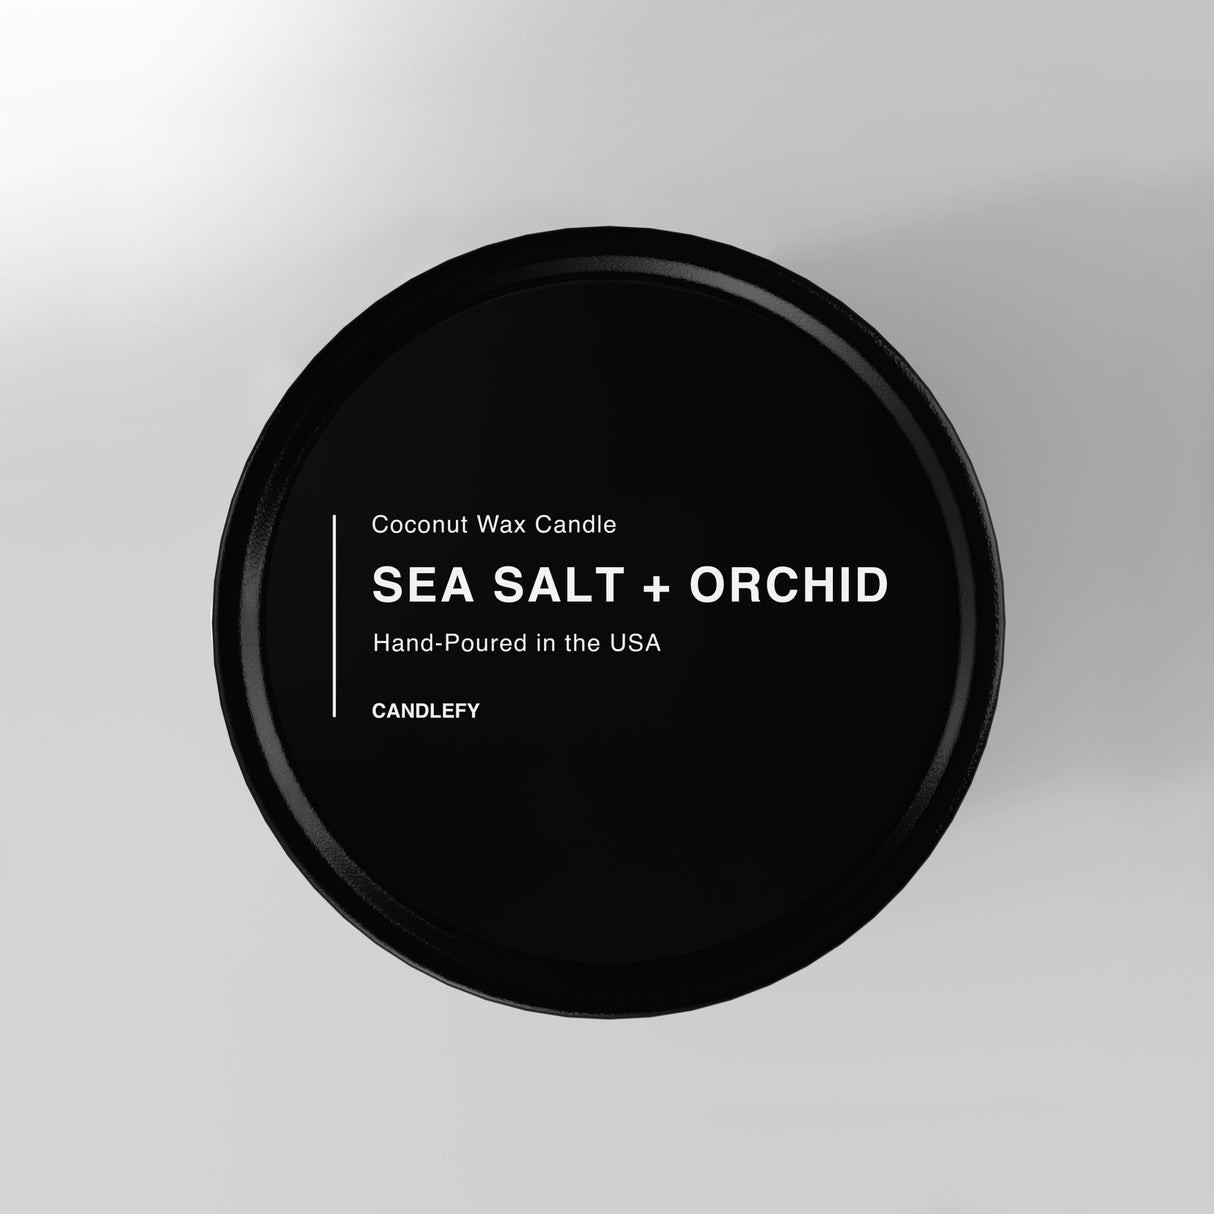 Sea Salt + Orchid Natural Wax Scented Candle in Black Travel Tin - Candlefy